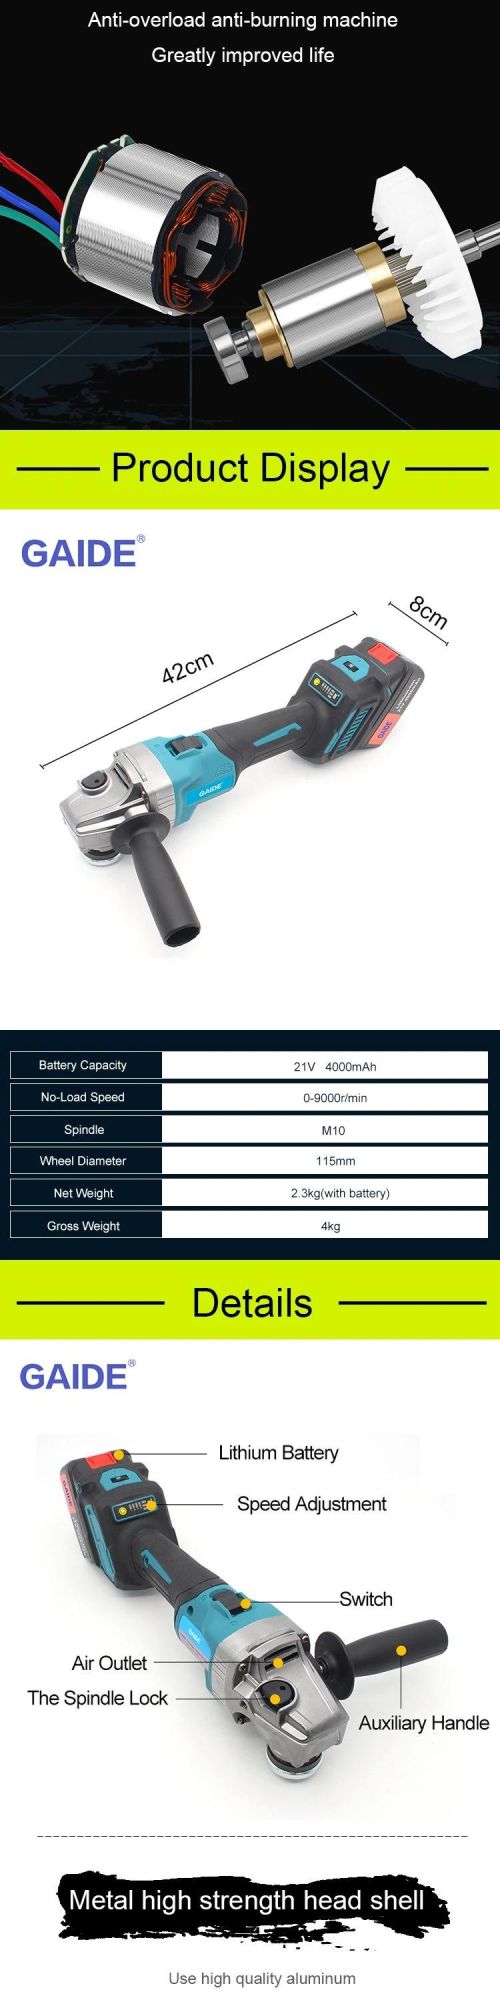 Chargeable Battery 4.0 Cordless Angle Grinder 125m M14